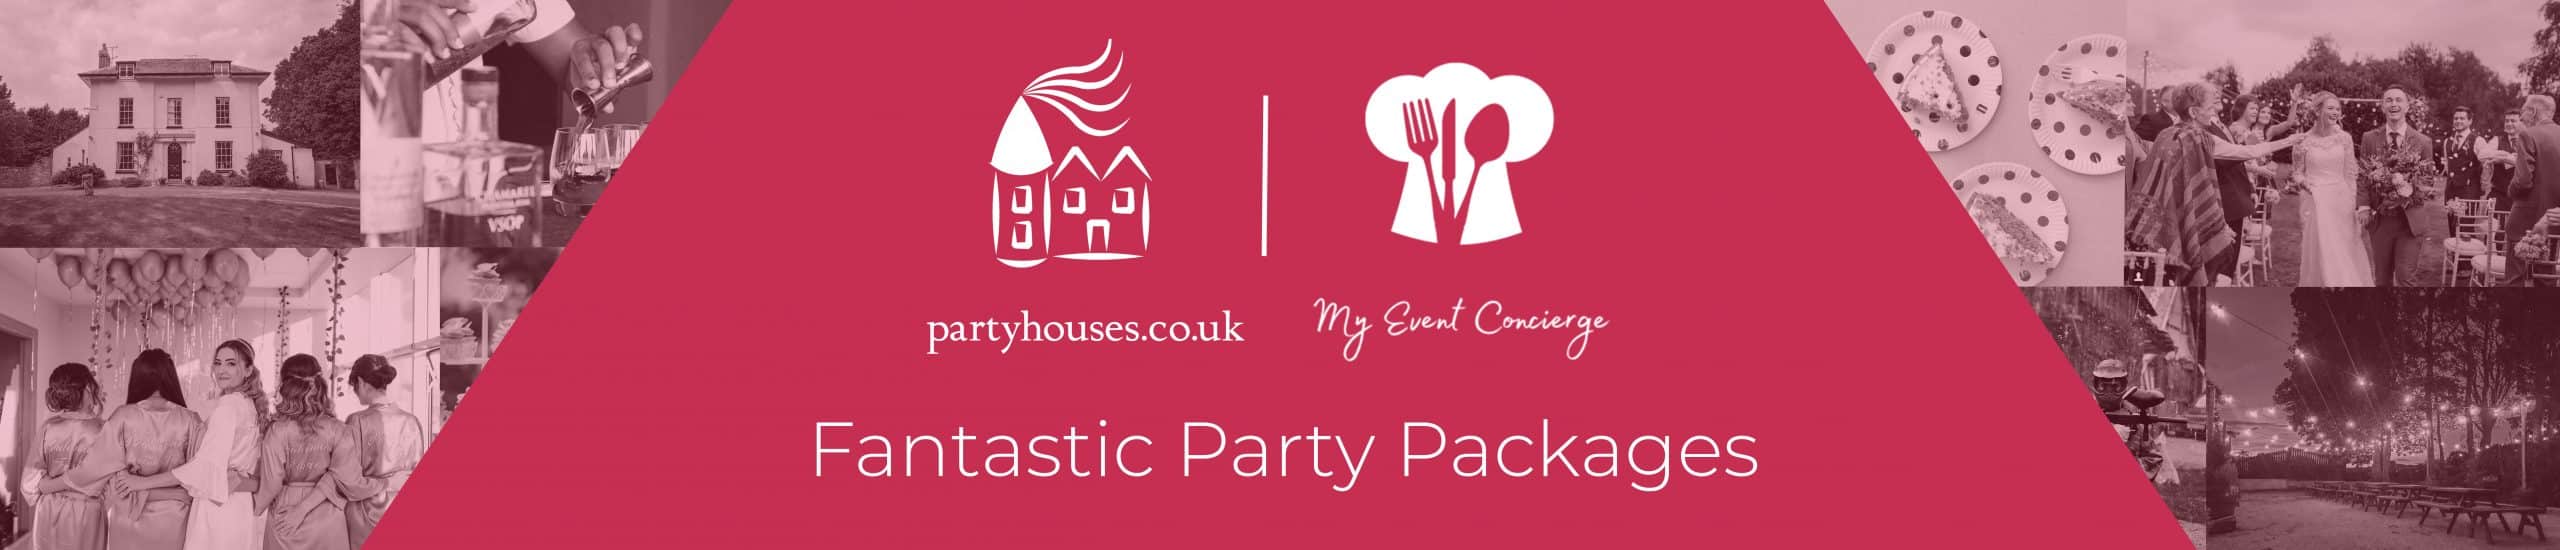 Hen & stag party packages